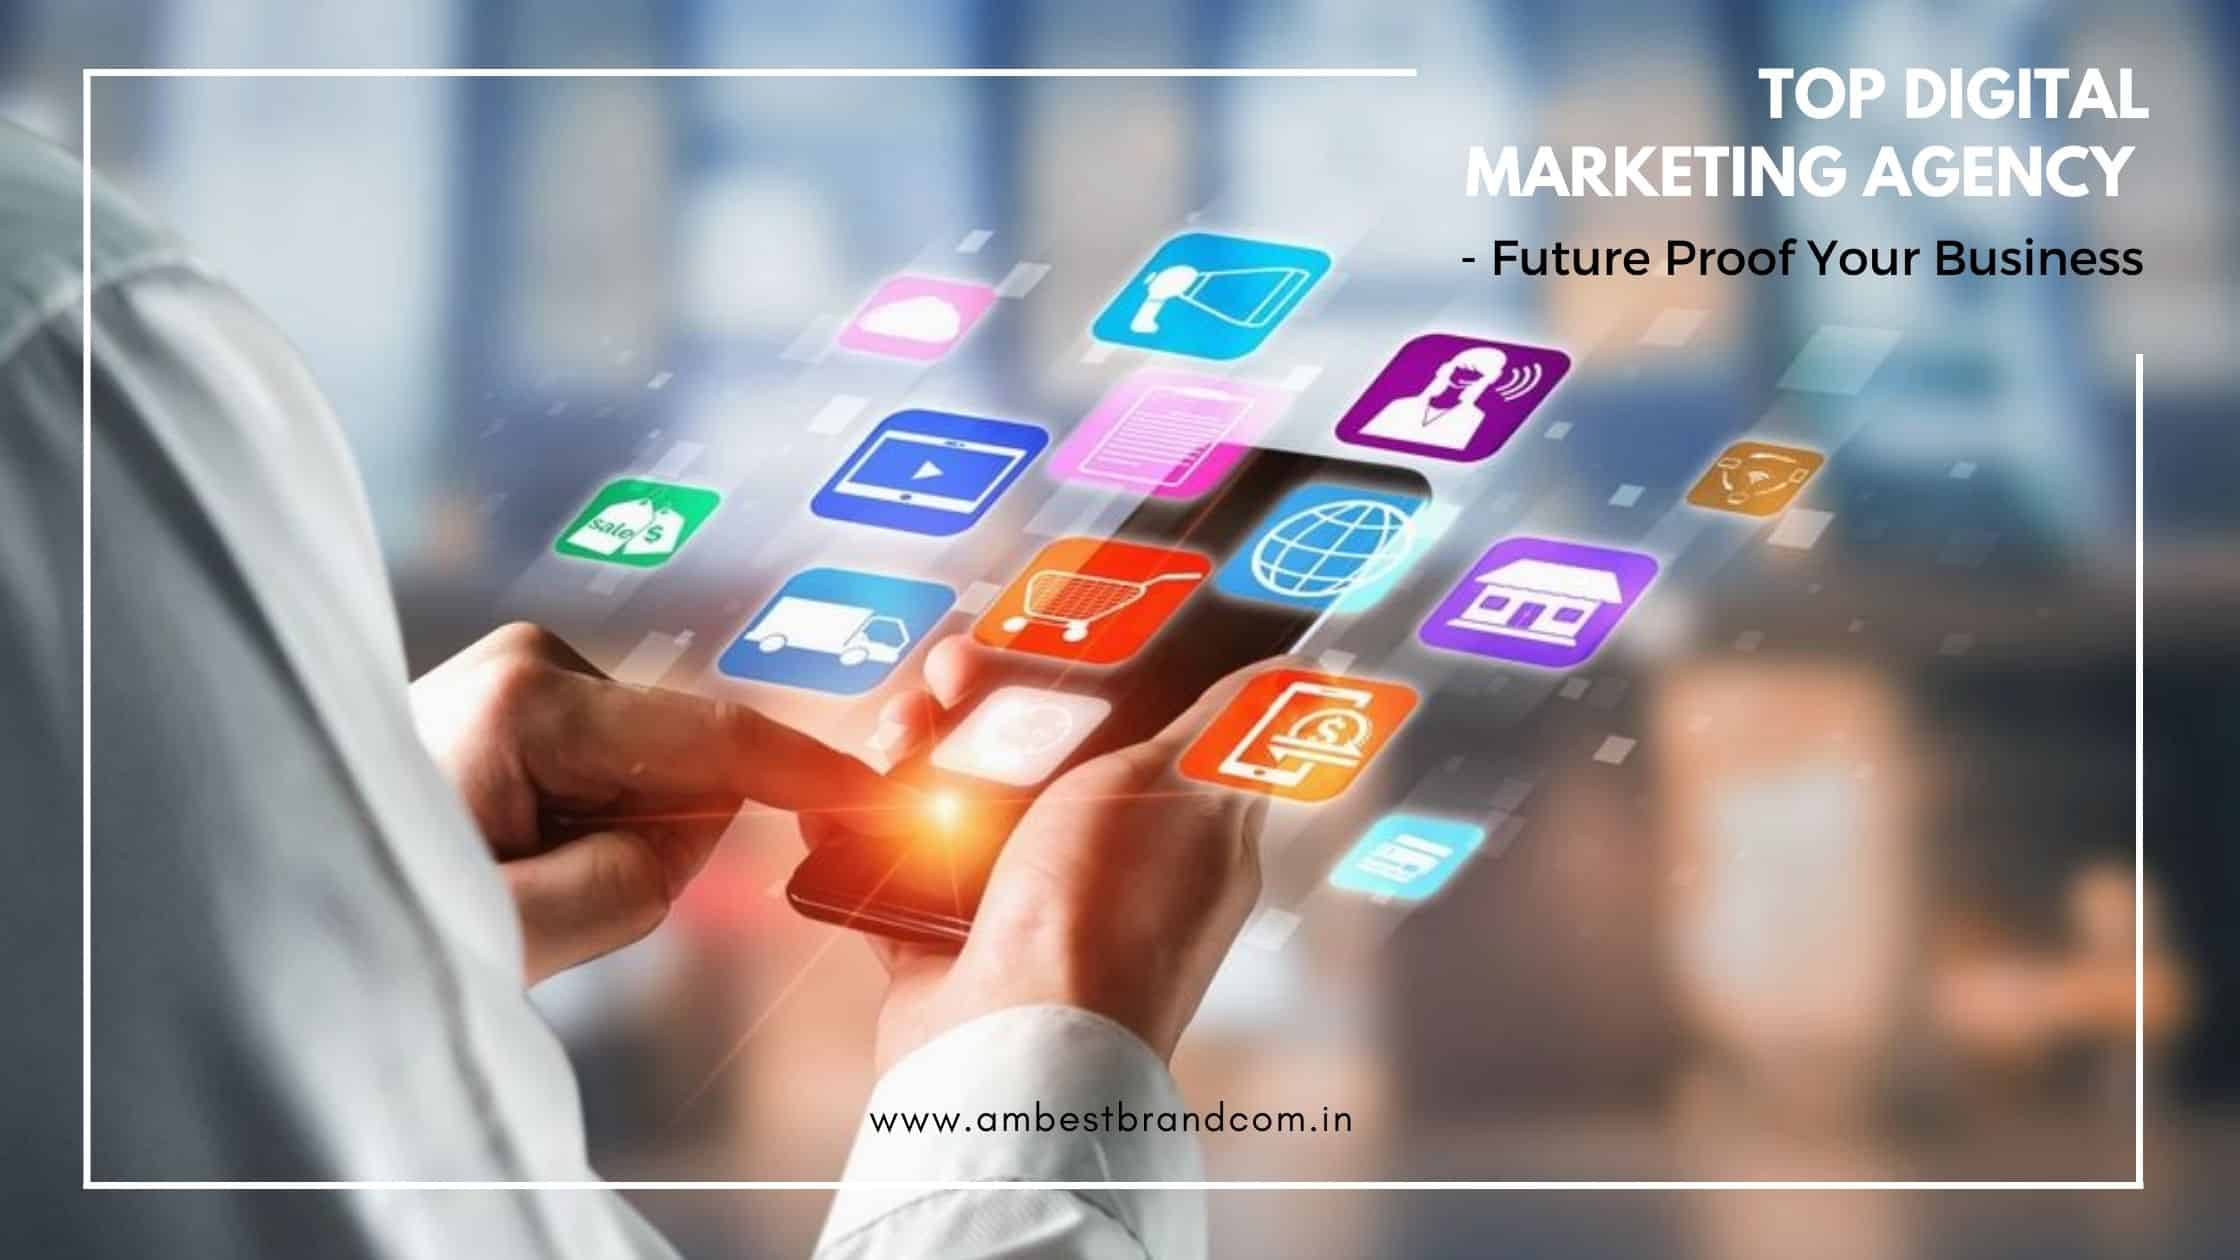 Top Digital Marketing Agency - Future Proof Your Business